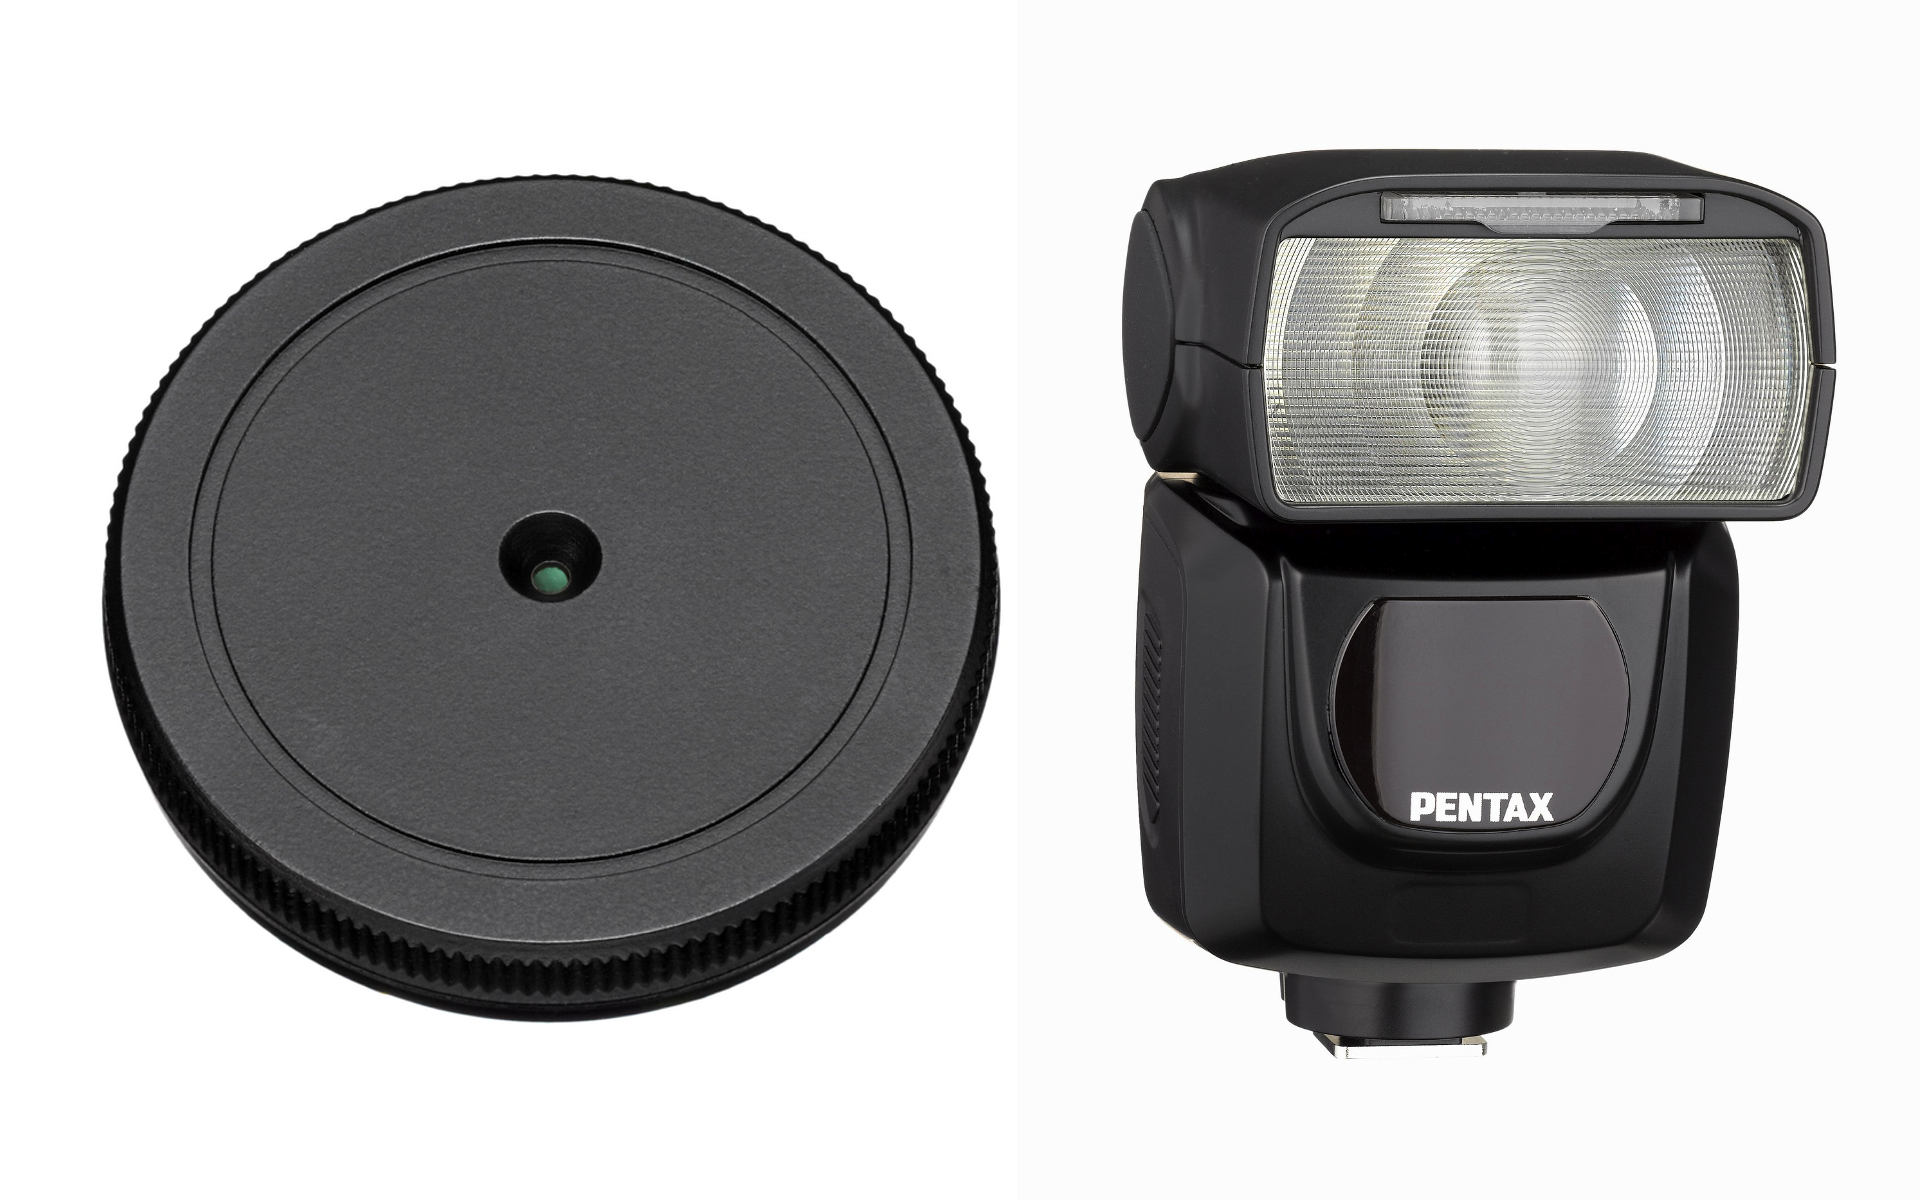 Pentax Lens and Flash